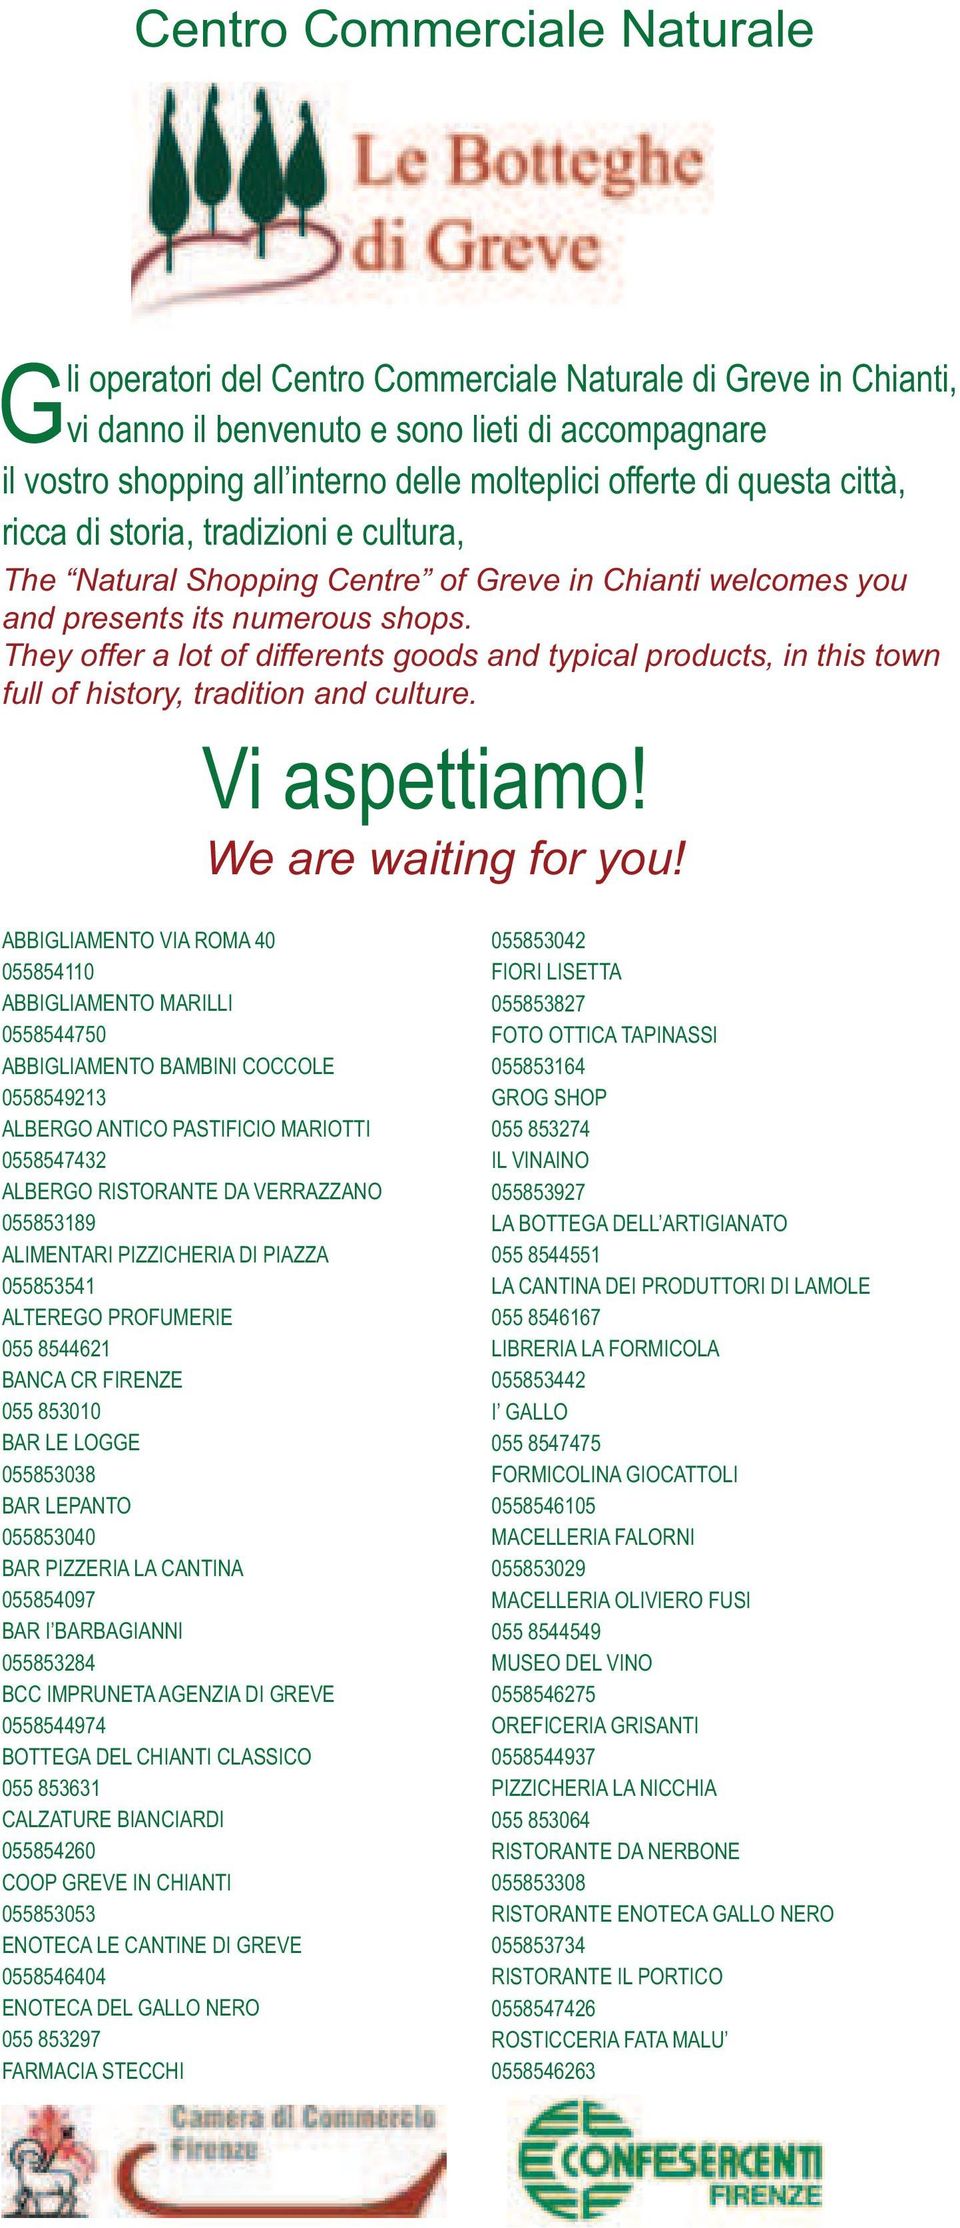 They offer a lot of differents goods and typical products, in this town full of history, tradition and culture. Vi aspettiamo! We are waiting for you!